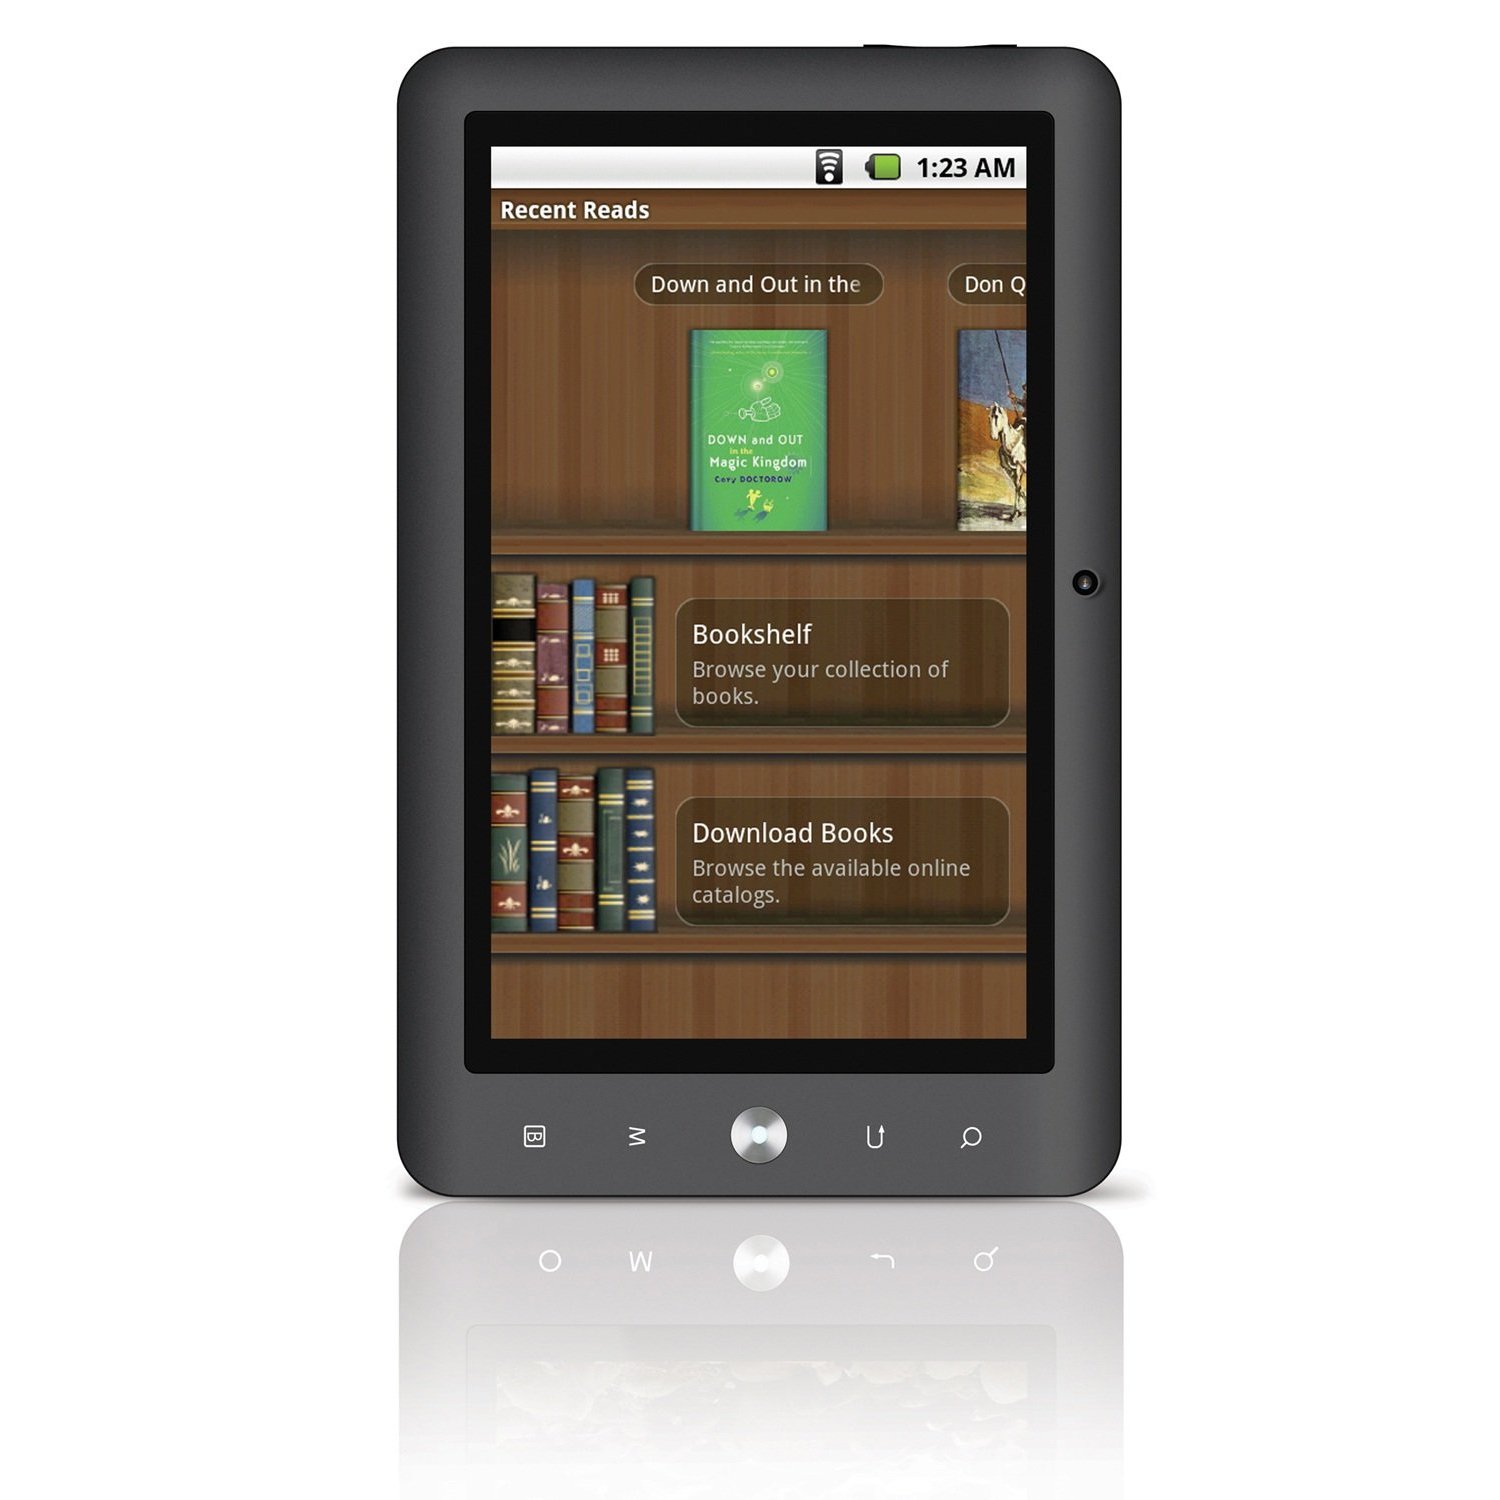 http://thetechjournal.com/wp-content/uploads/images/1108/1313981281-coby-kyros-4-gb-7inch-touchscreen-and-android-22-powered-tablet--3.jpg